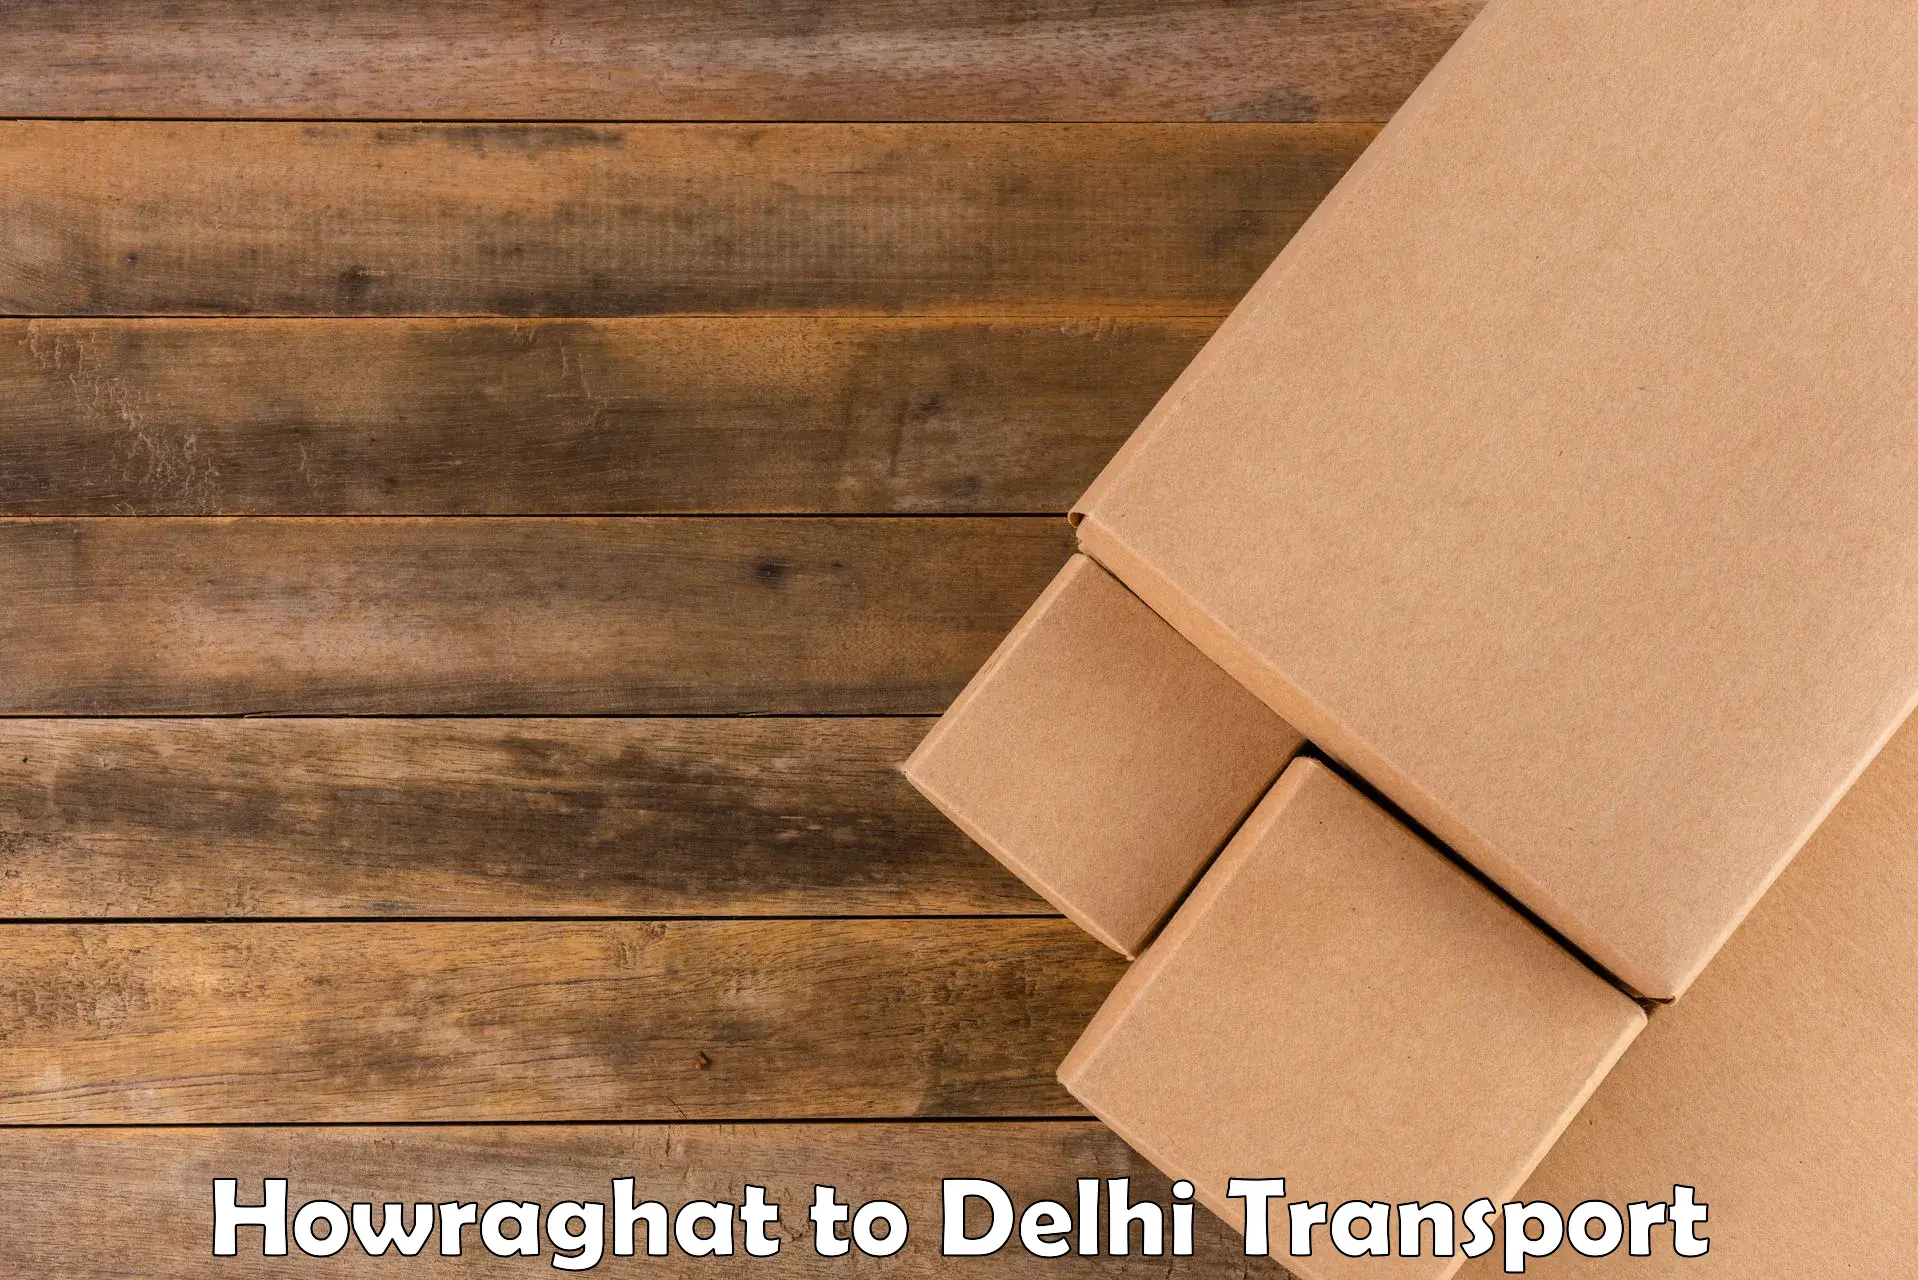 Air freight transport services Howraghat to University of Delhi